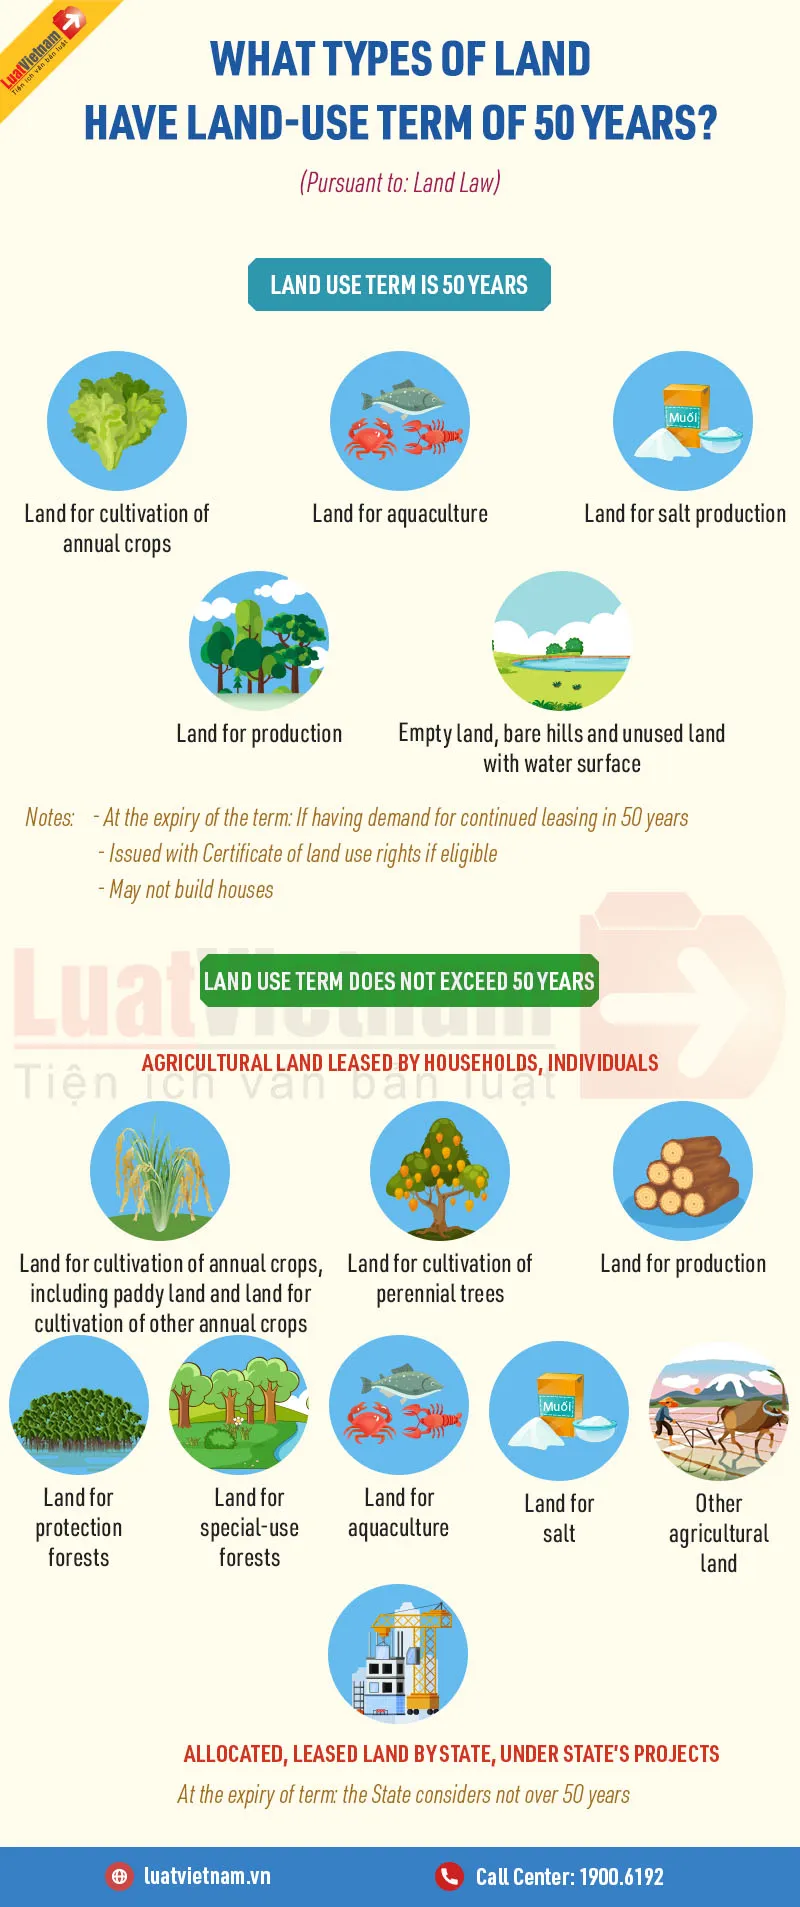 What are types of land having land use term of 50 years